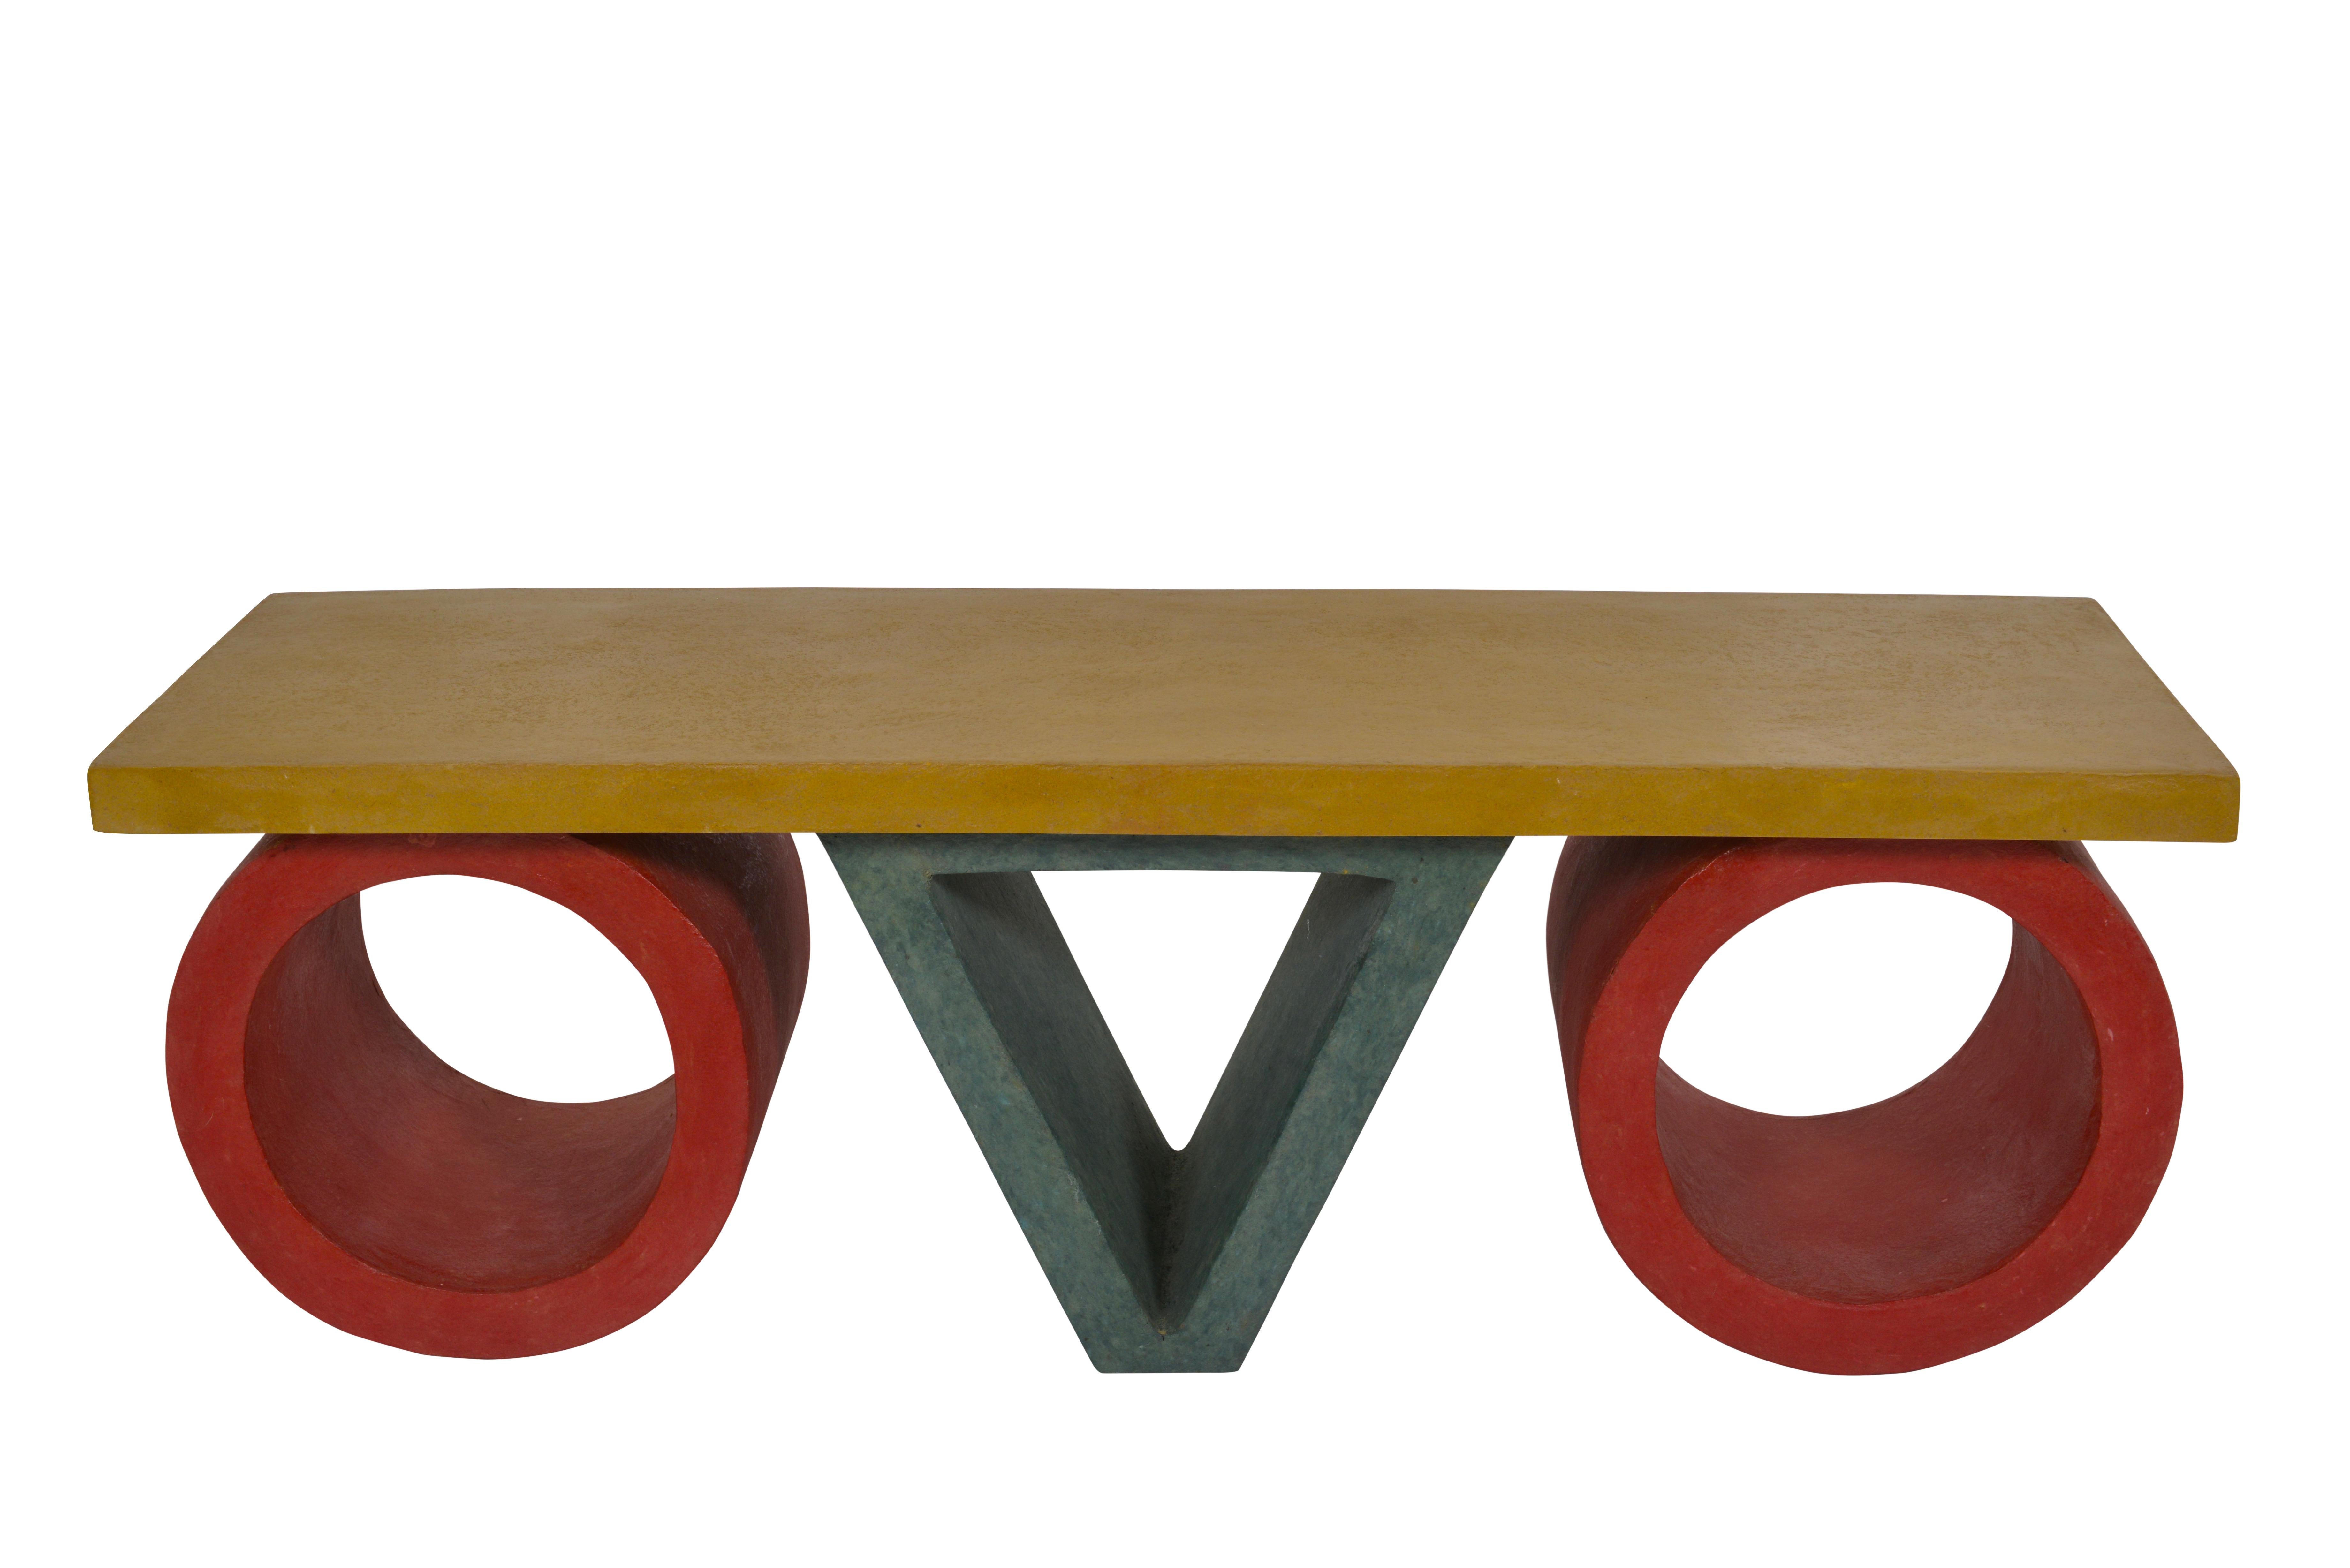 Off the wall pair of coffee tables in the French Postmodern style. Postmodernism originated in the late 1970s as a response to Modernism. It is characterized by the return of ornament and symbol to form. Modernism was ‘reductive’, Postmodernism is